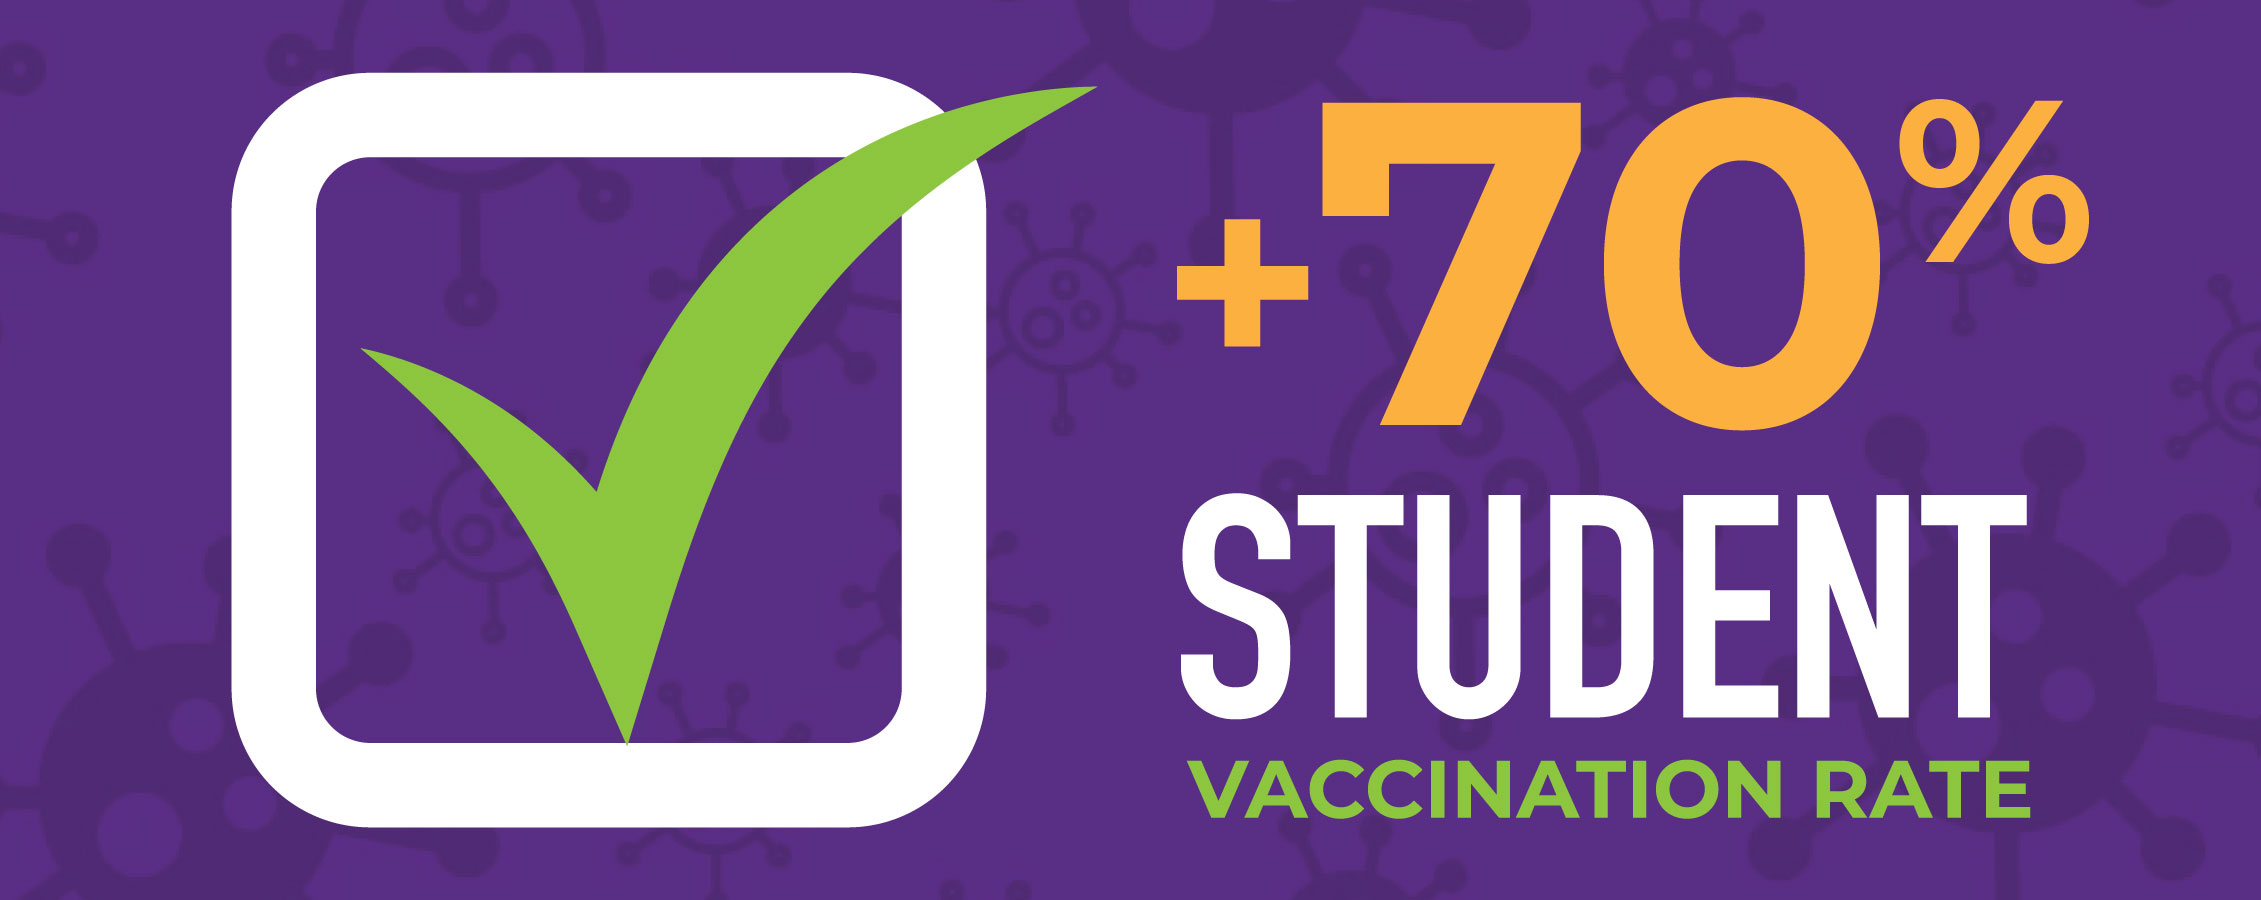 70% student vaccination rate.